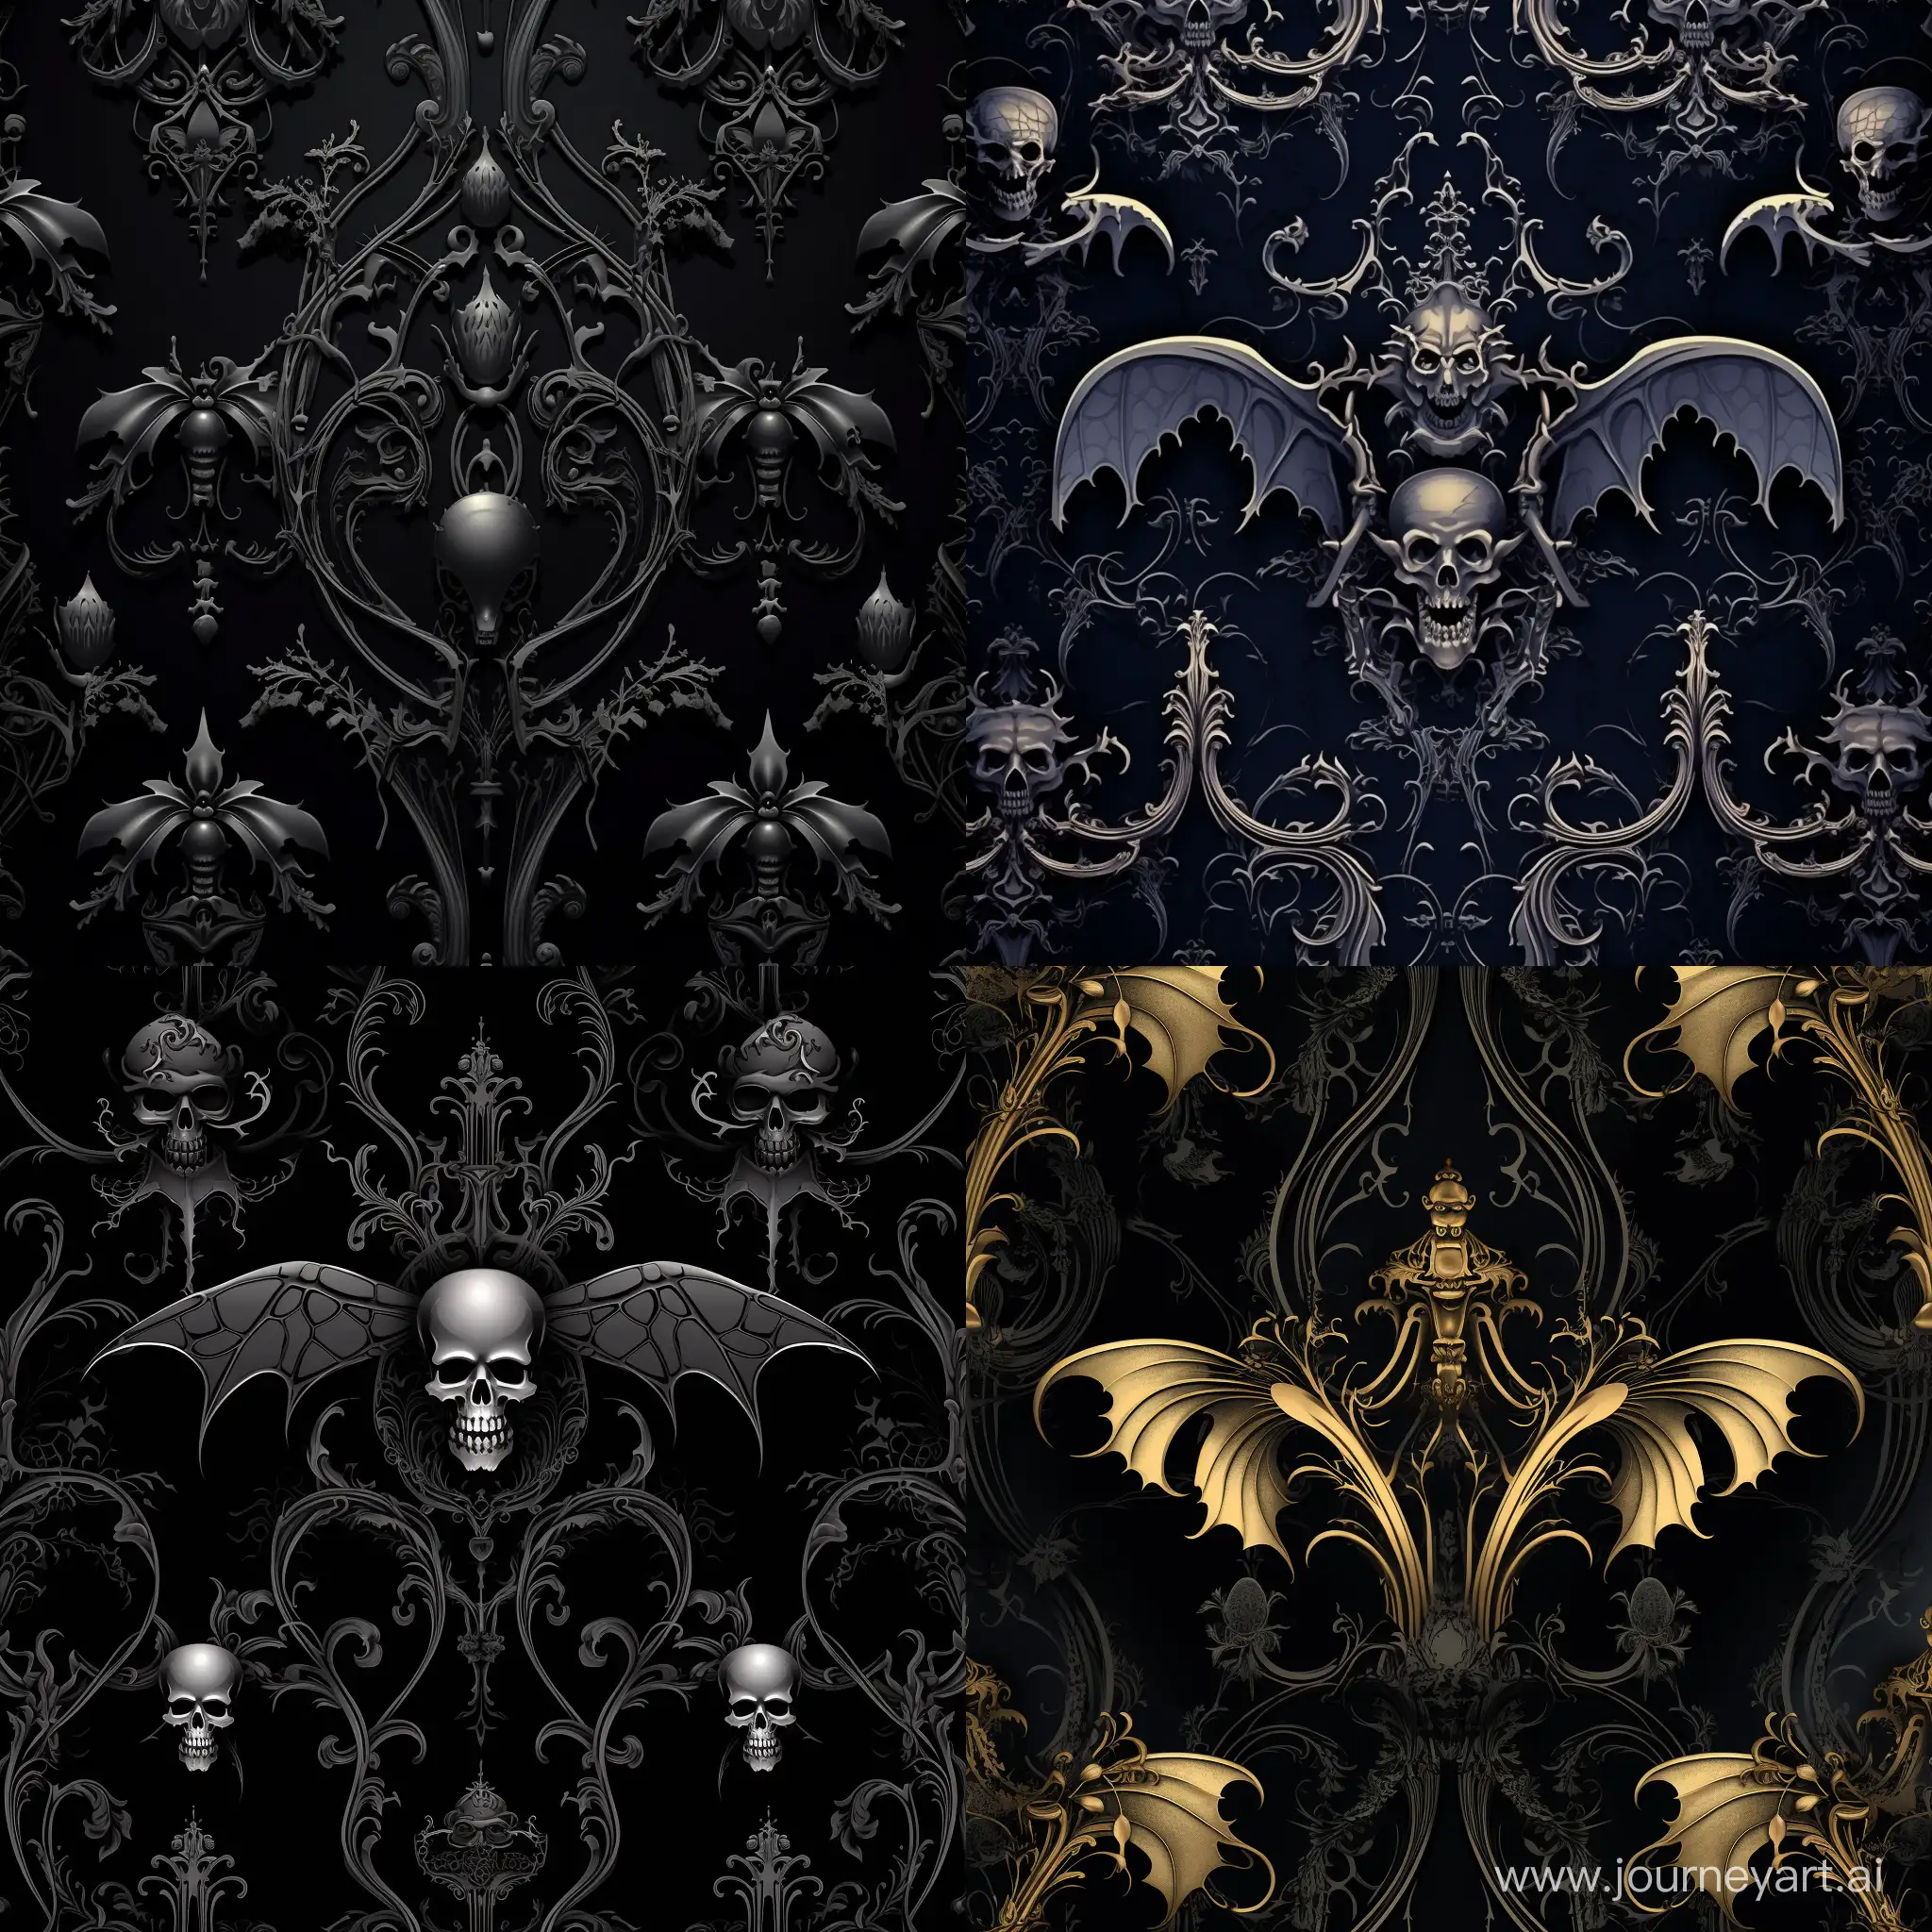 Elegant gothic Victorian Damask pattern with bats and spiders